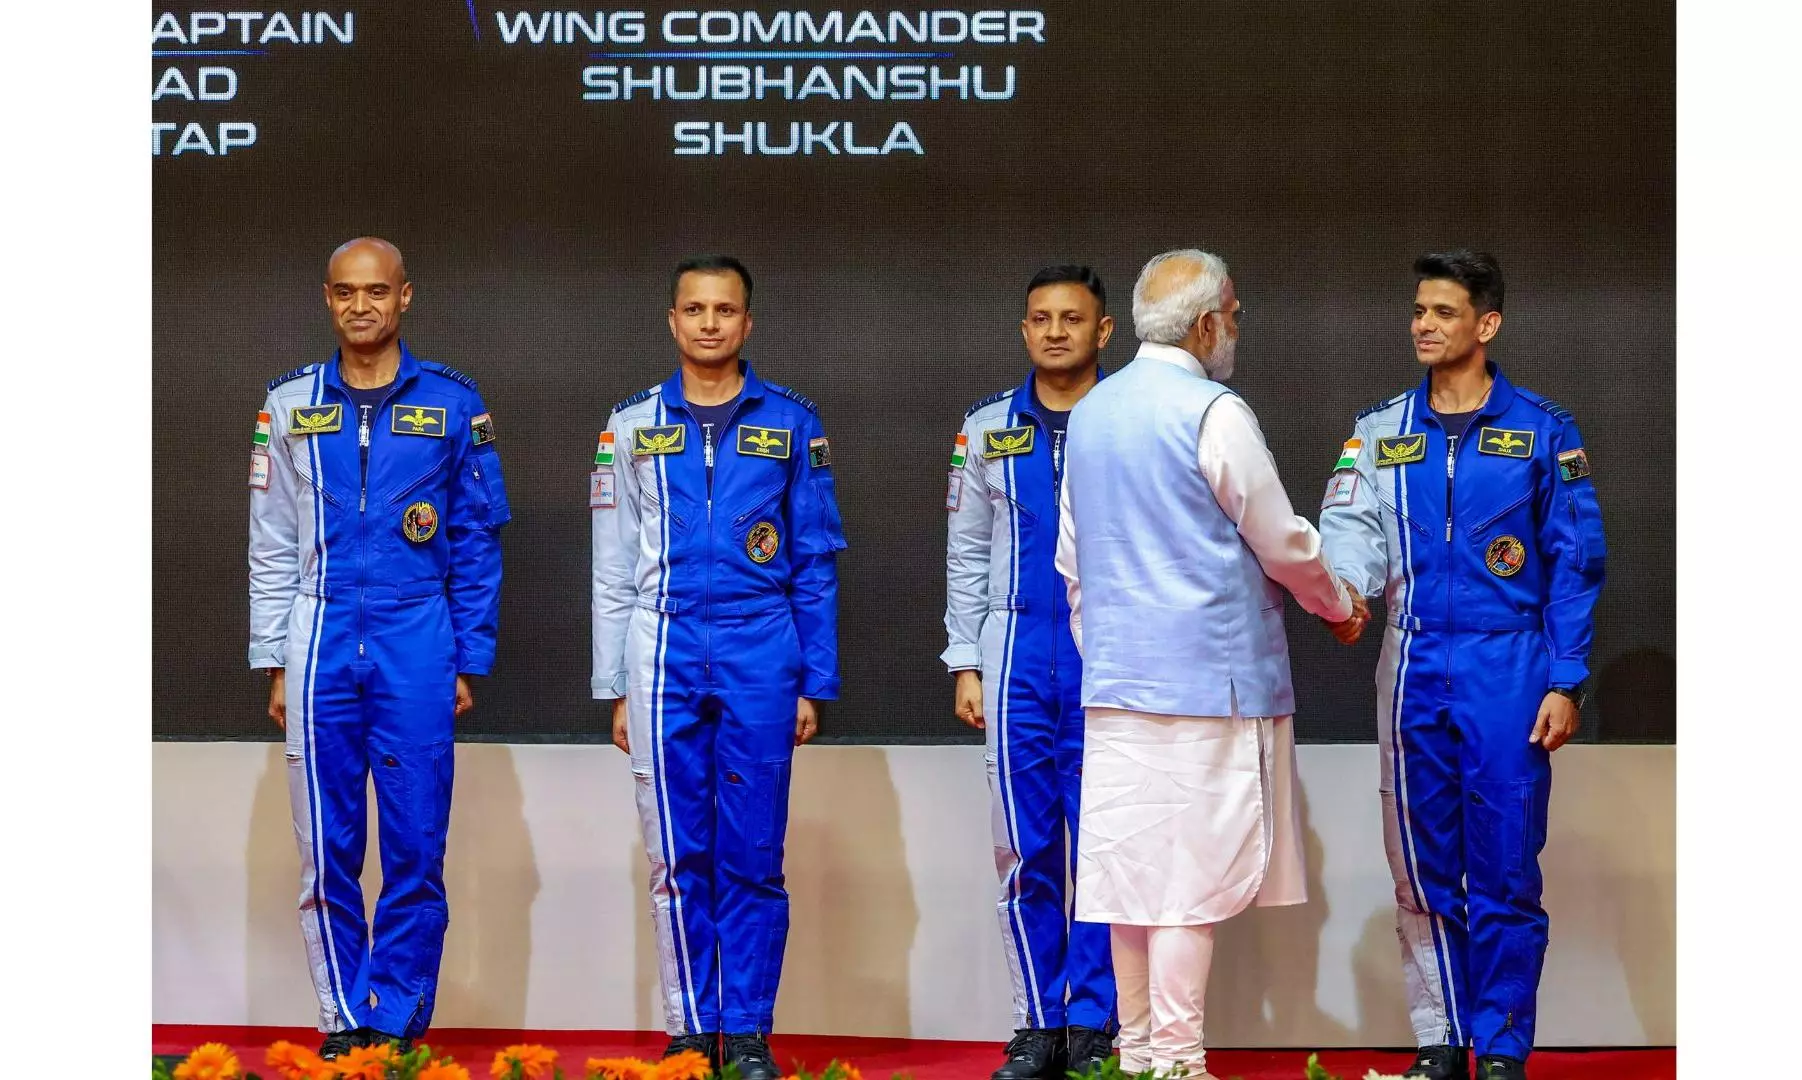 PM Modi announces names of 4 astronauts chosen for Indias Gaganyaan Mission